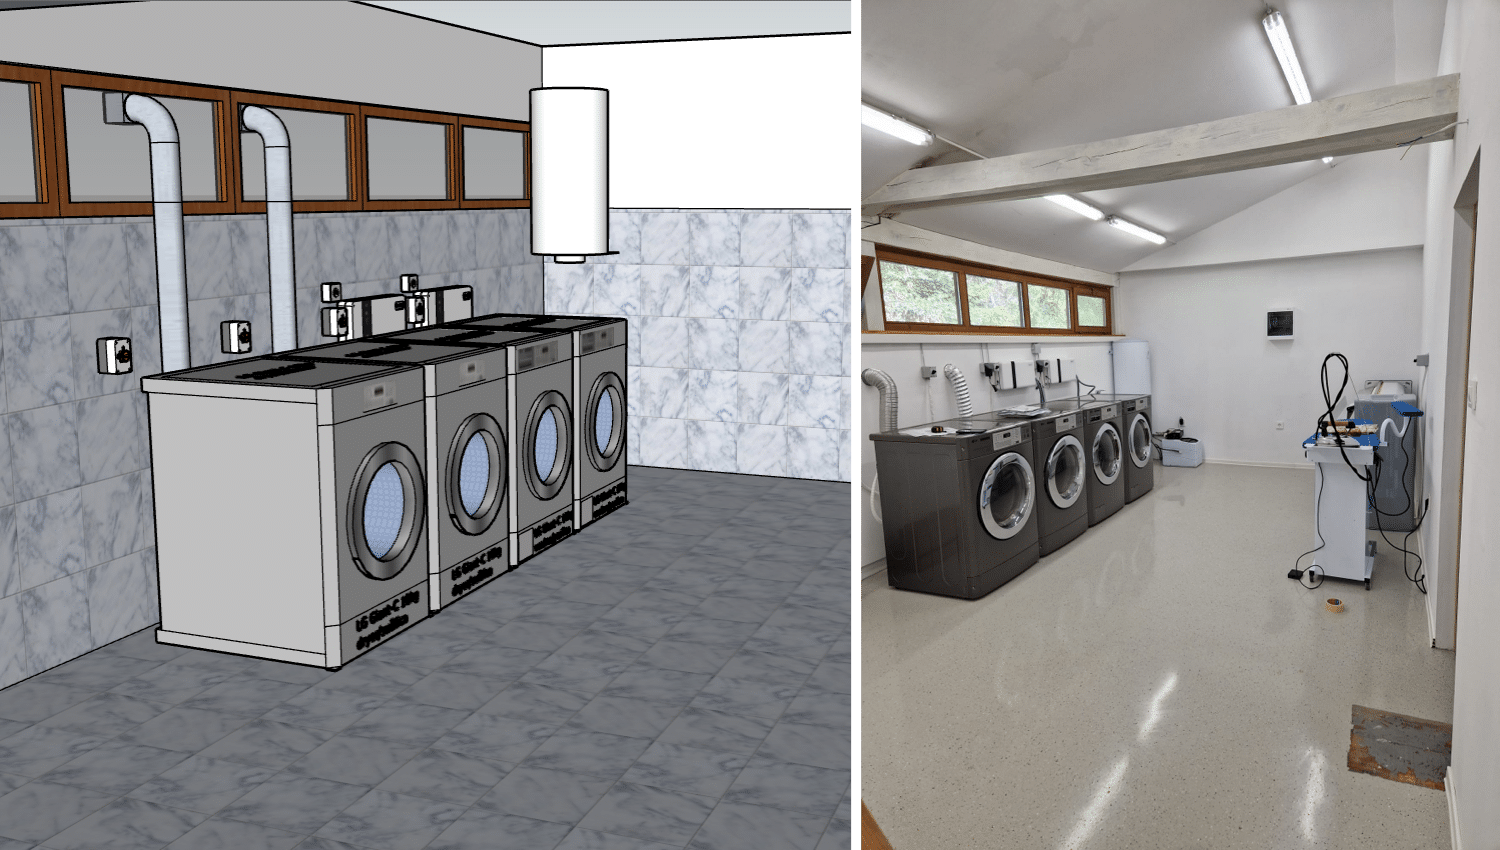 3D model of commercial laundry compared with finished commercial laundry